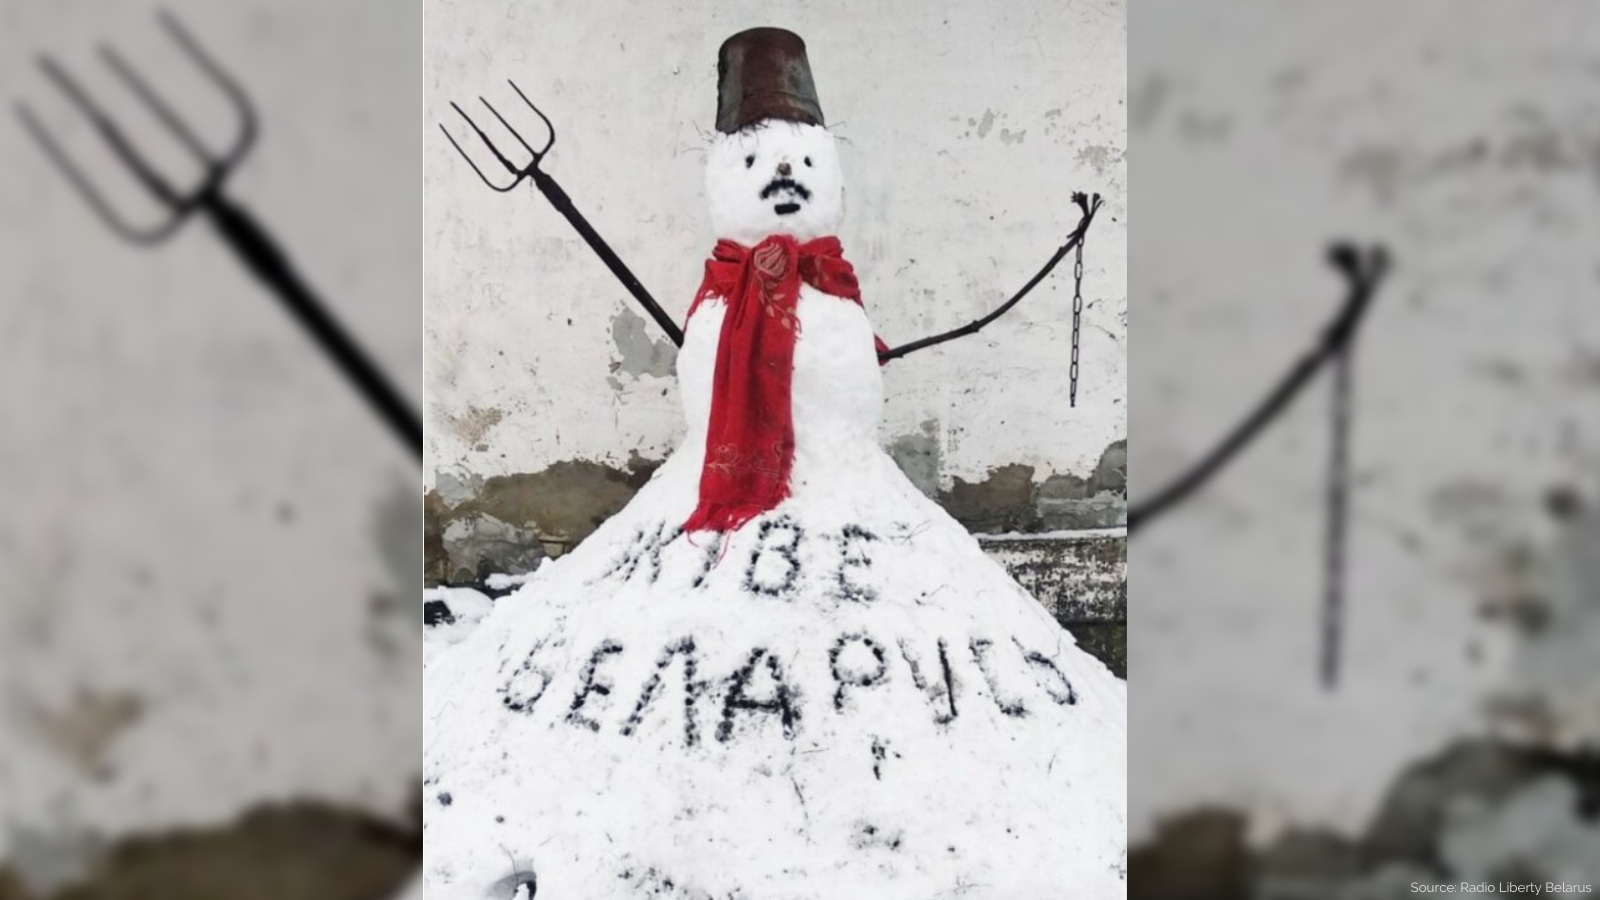 Crack down on protests in Belarus, white-red-white flag on a snowman